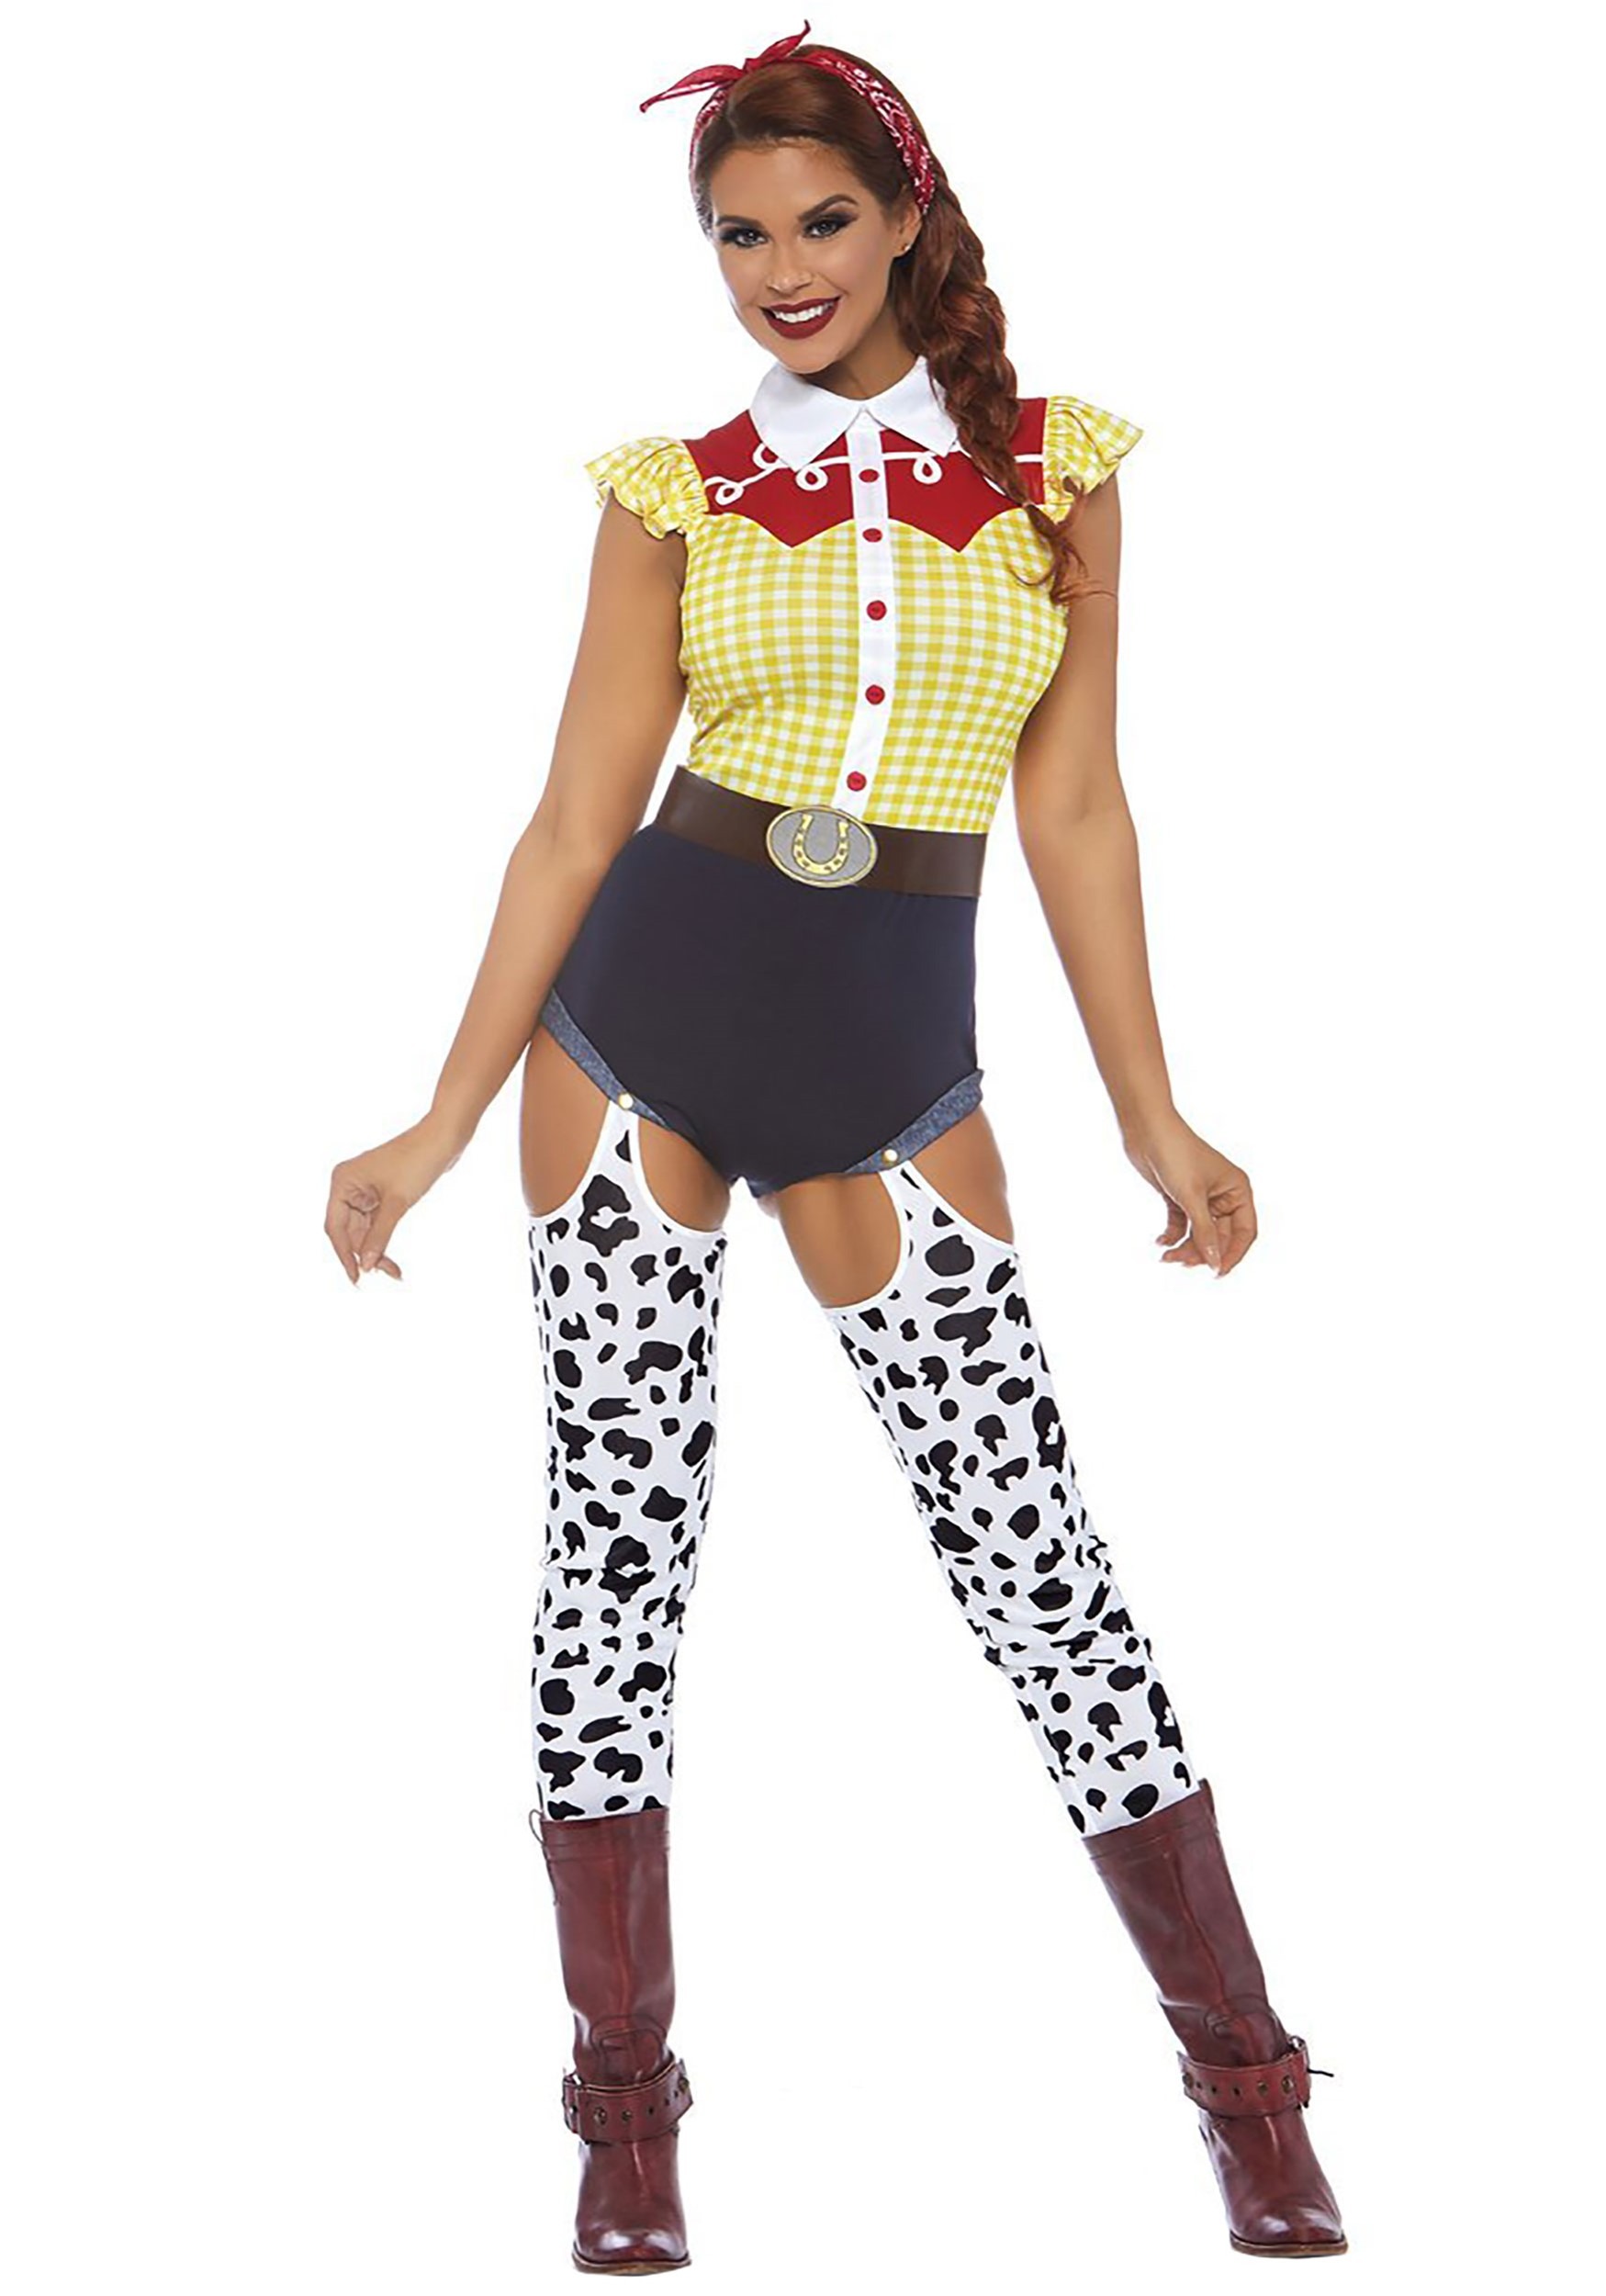 The Women’s Toy Cowboy Costume